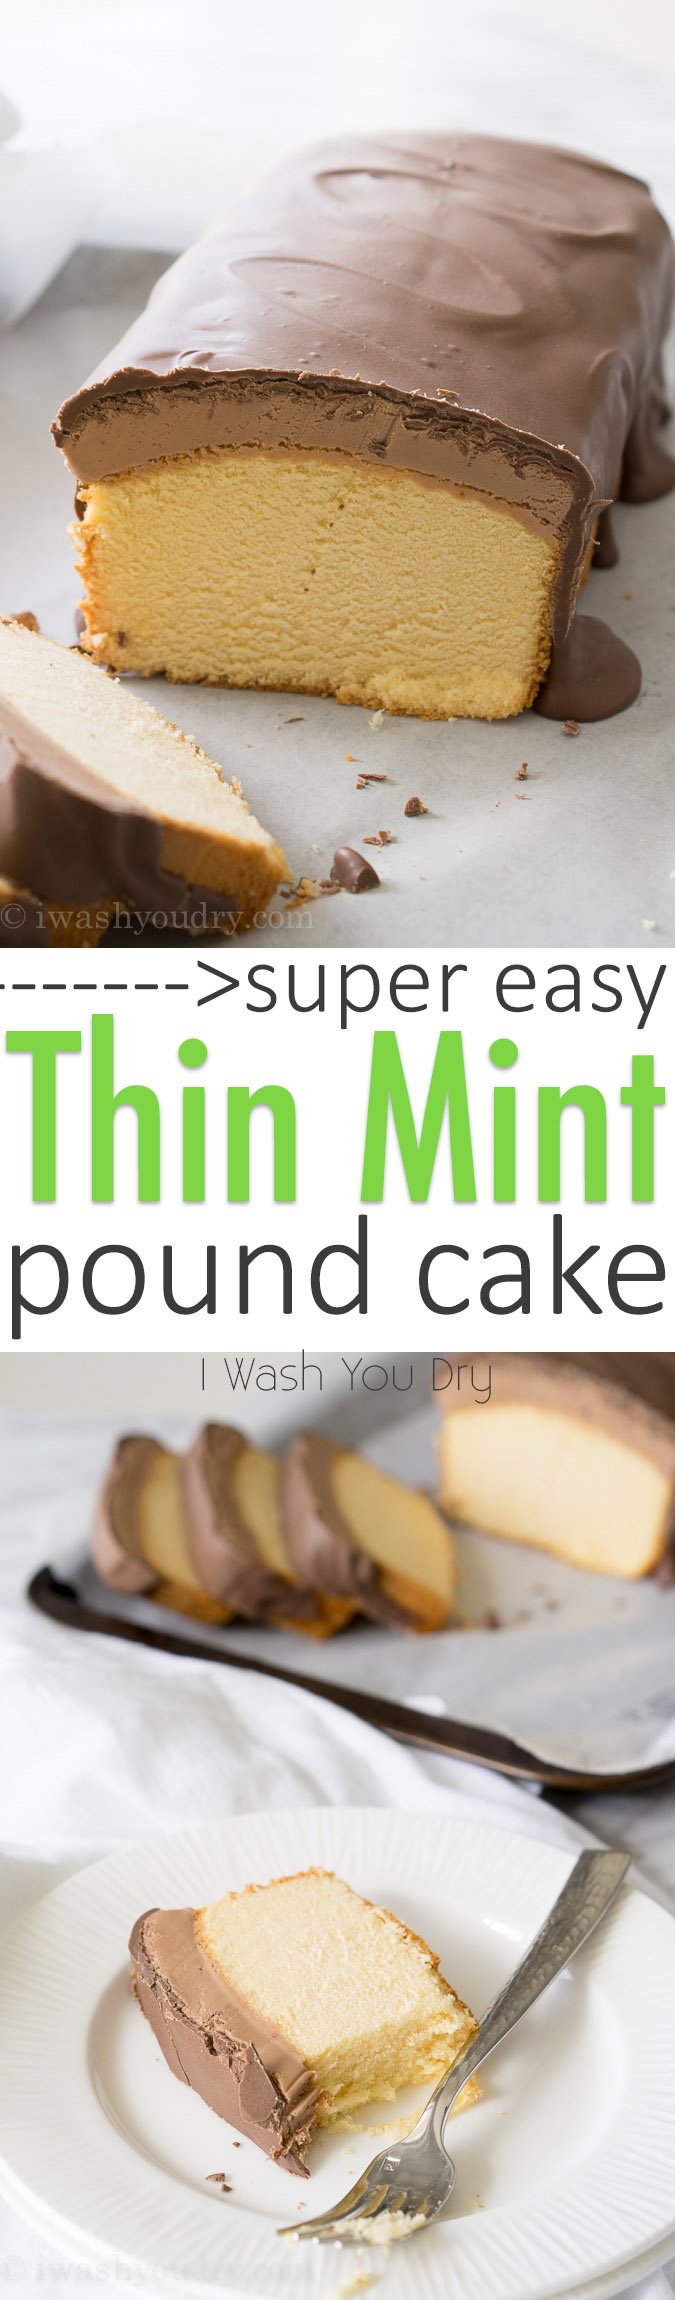 Super Easy Thin Mint Pound Cake!! Takes just 10 minutes to make and tastes SOOO good! Definitely making this one again!